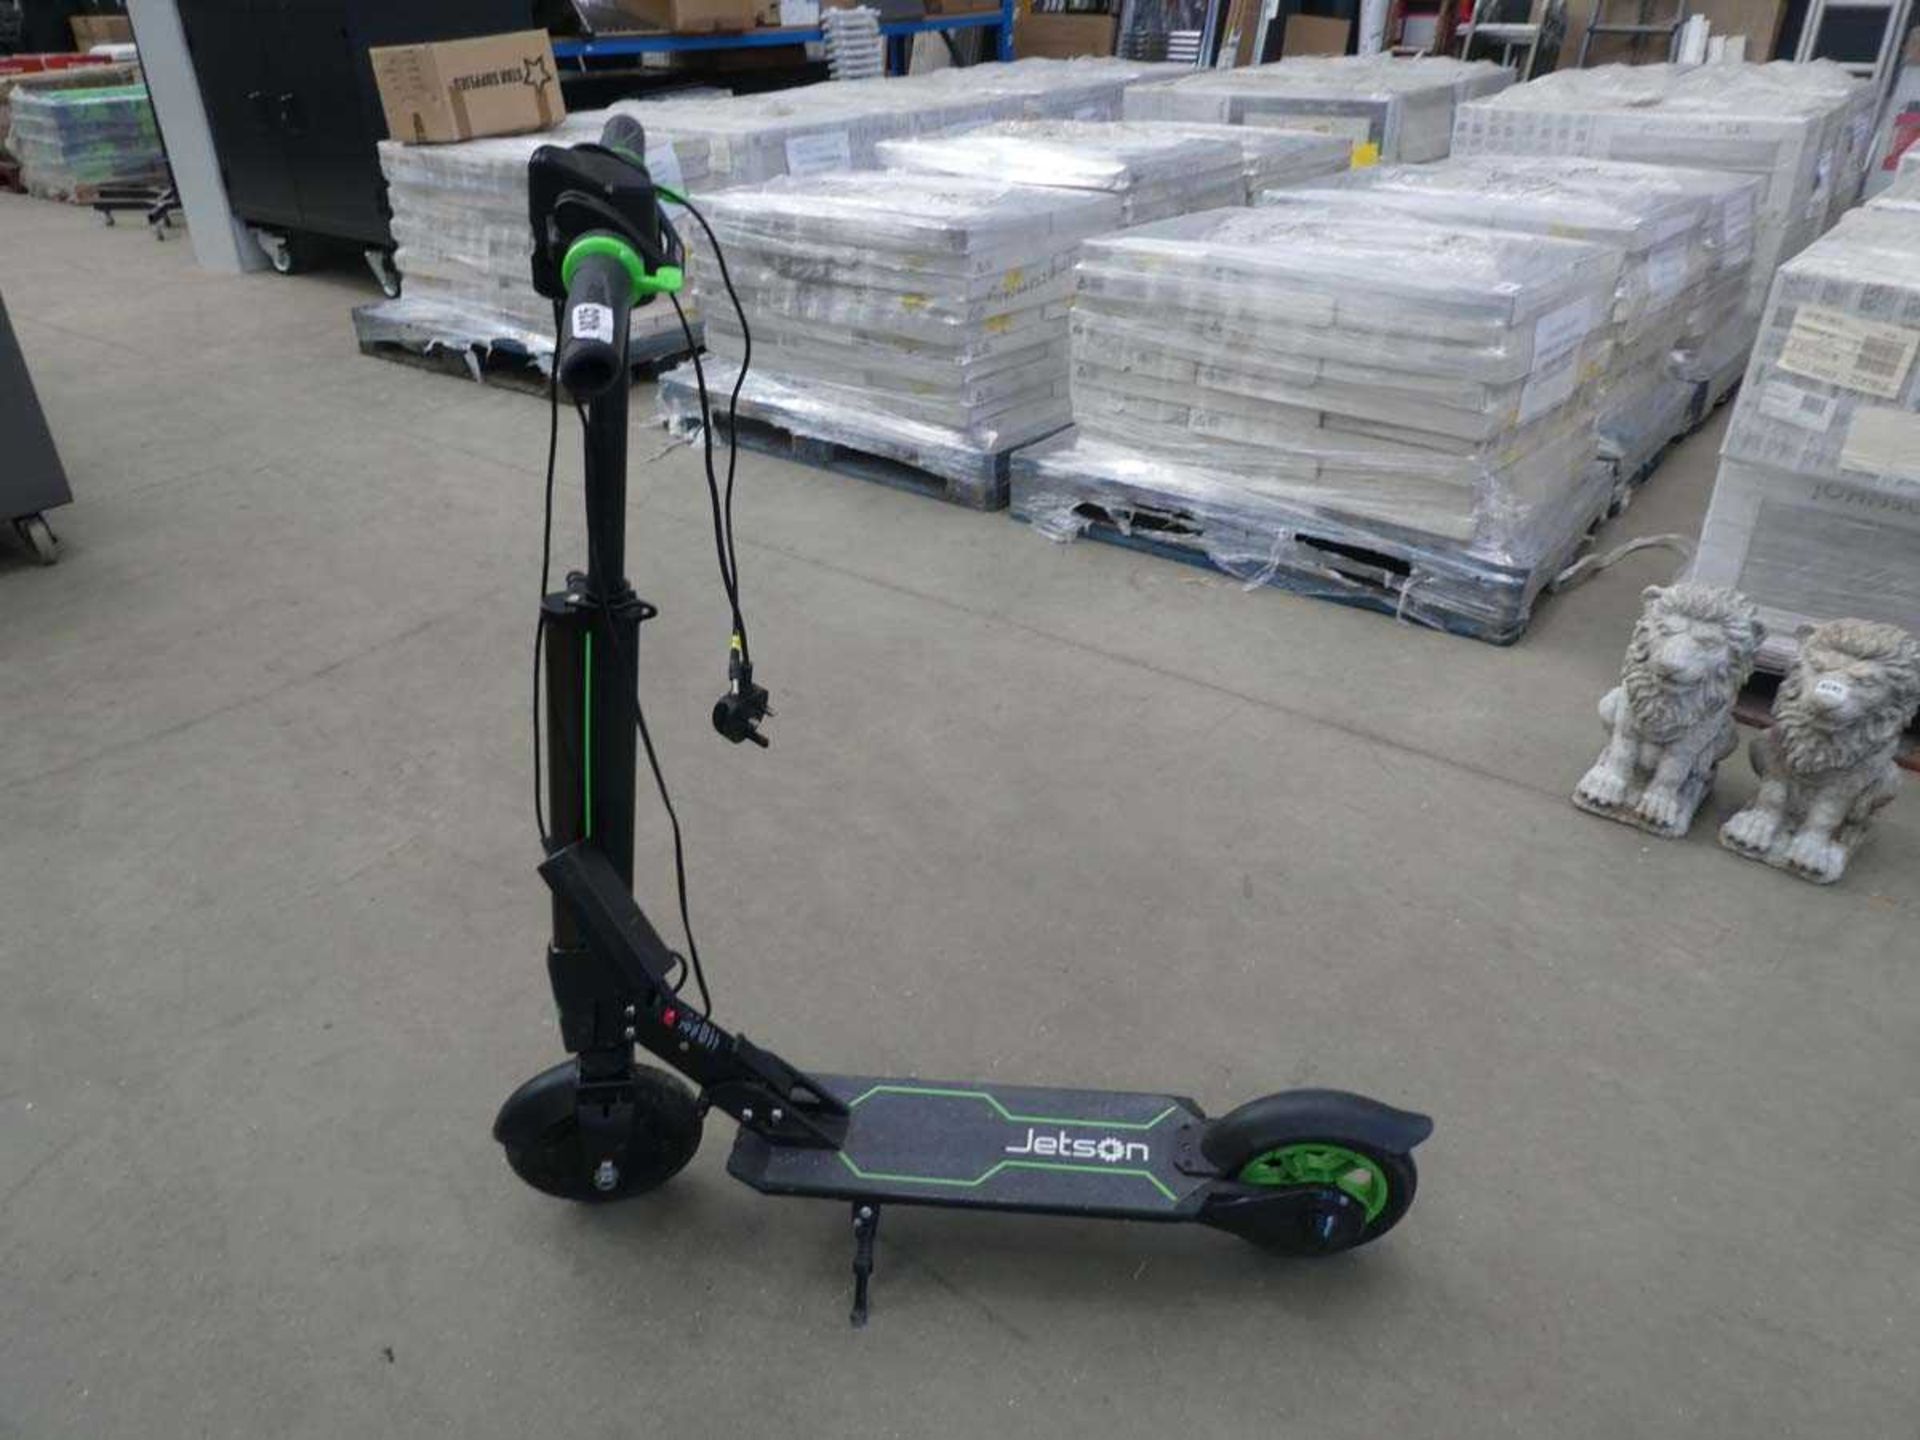 Jetson Beam electric scooter complete with charger